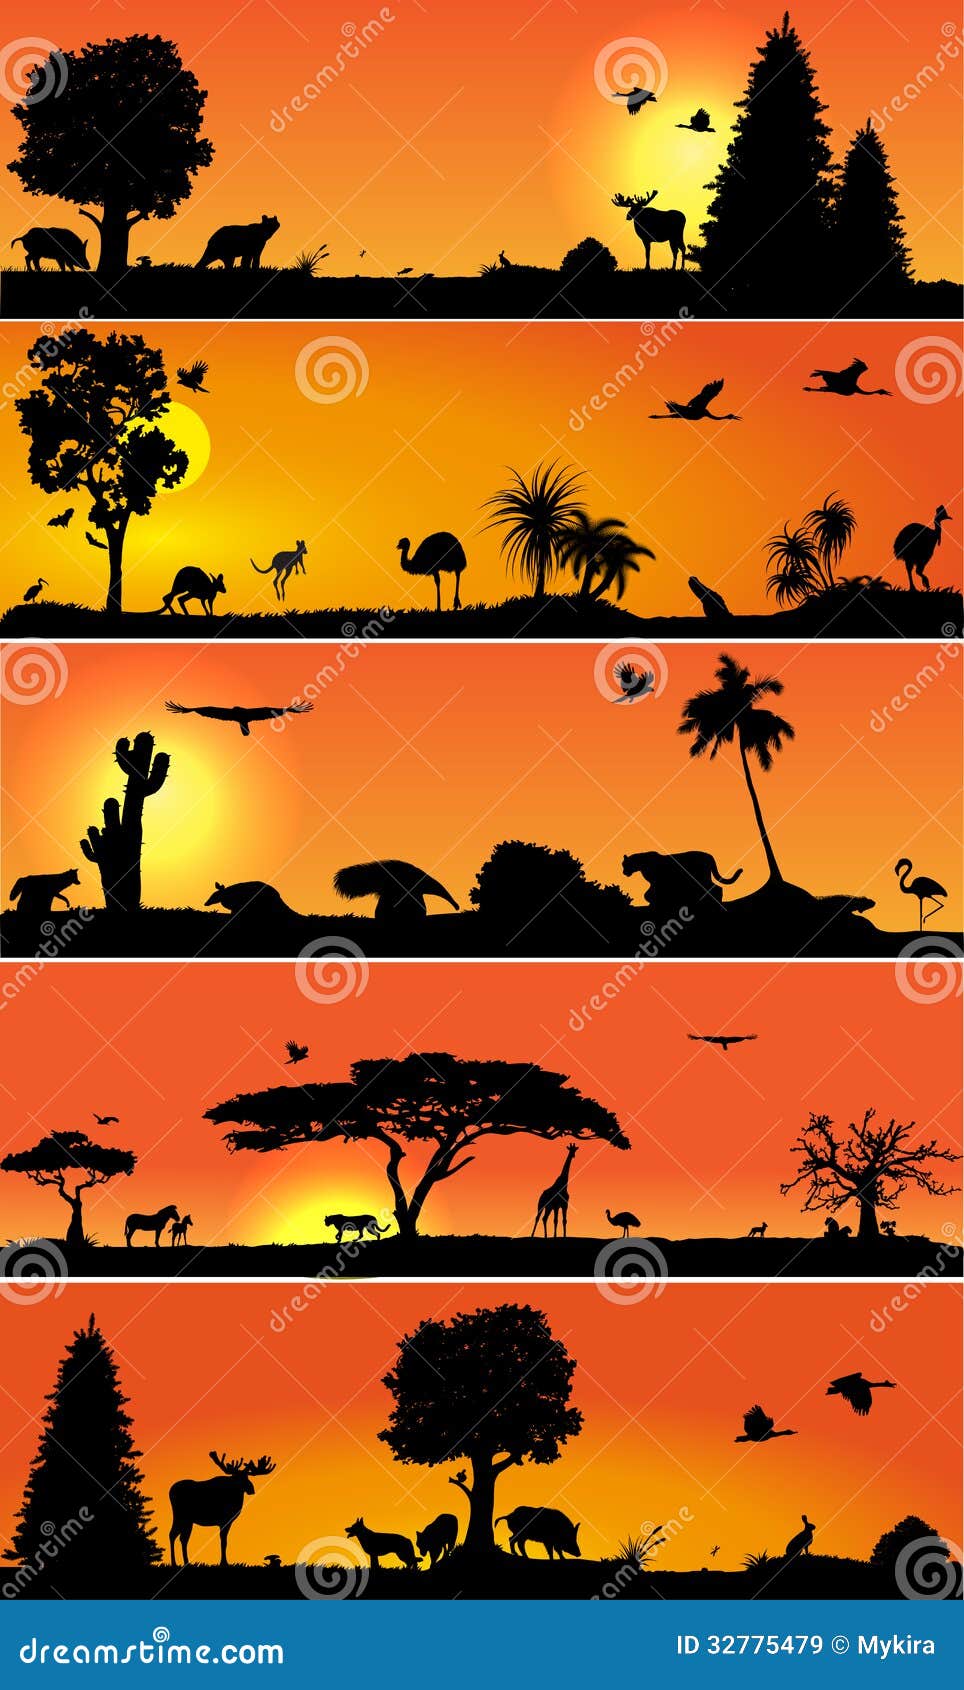  banners with wold fauna and flora